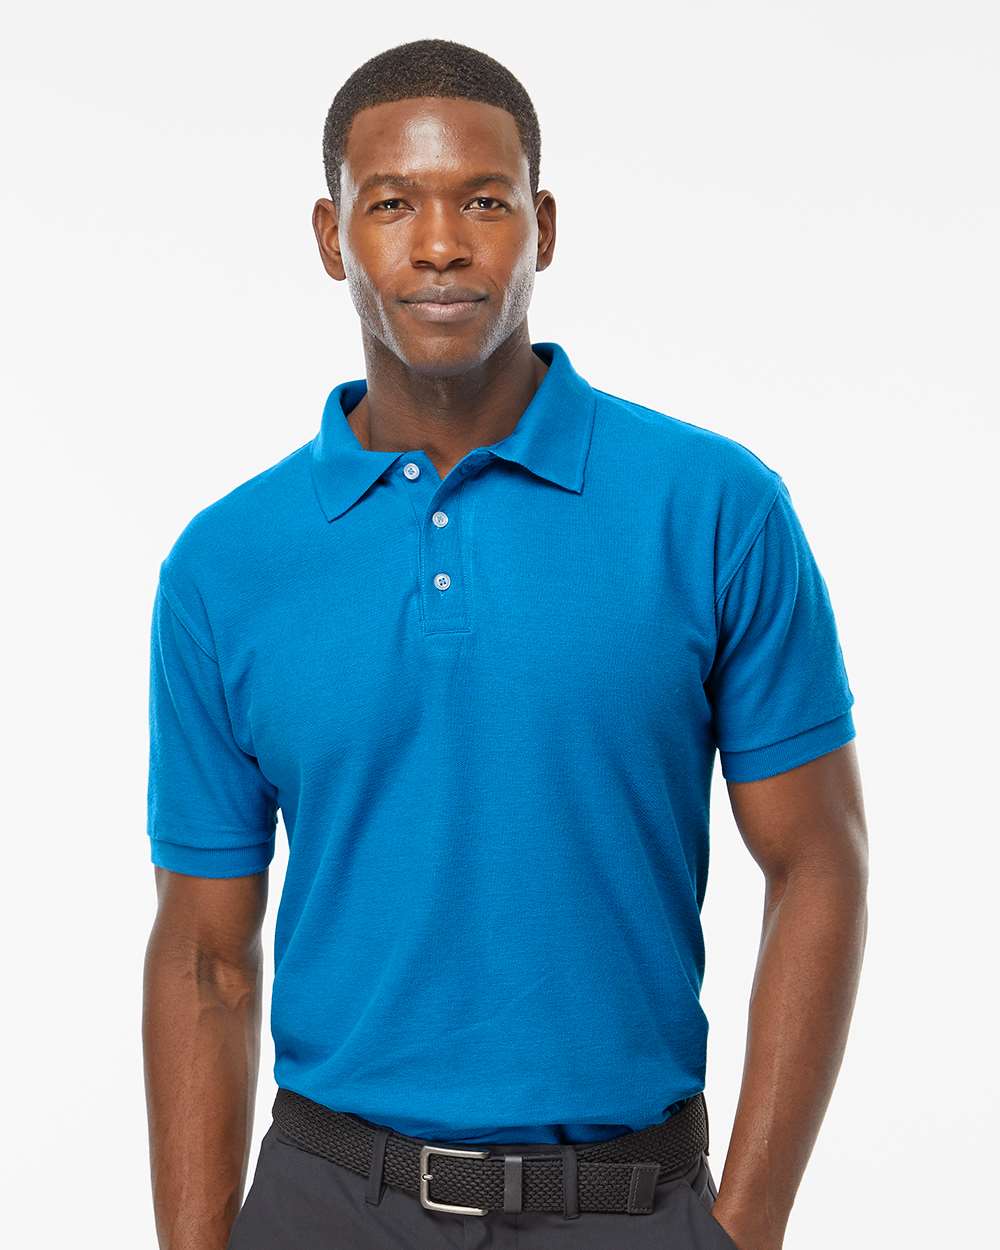 M&O Soft Touch Polo #7006 Turquoise